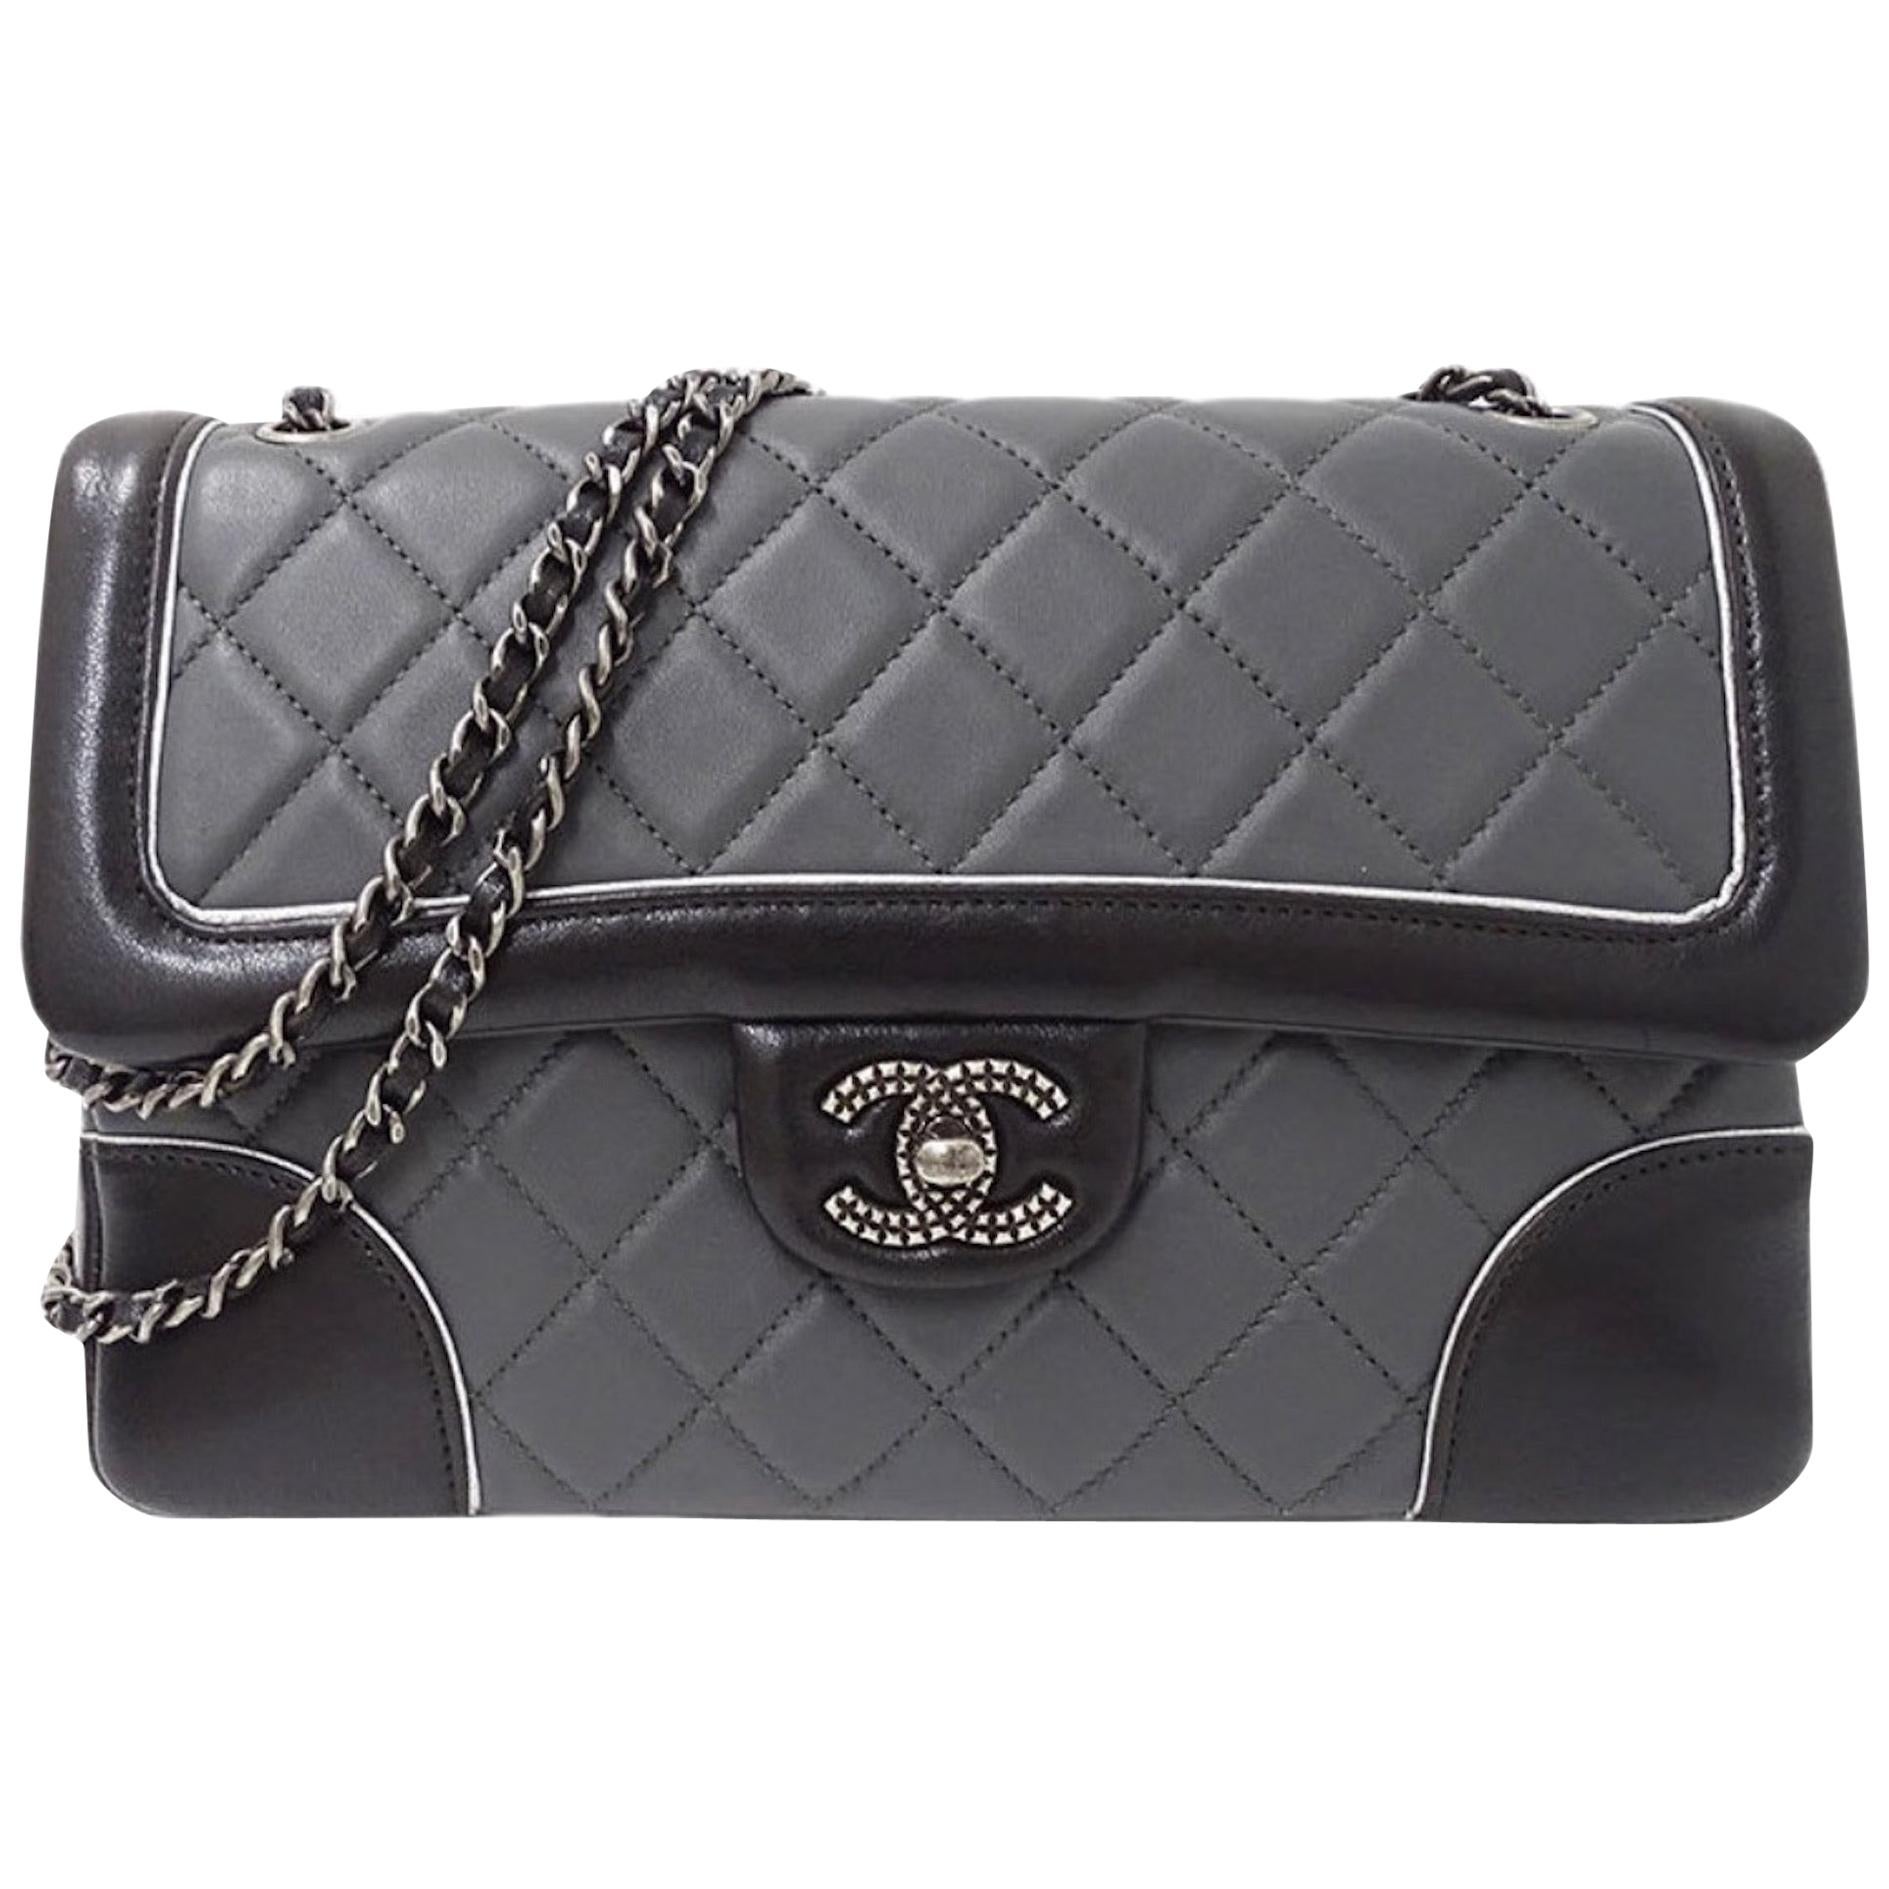 Chanel Black Gray Two Tone Leather Gunmetal Quilted Evening Shoulder Flap Bag